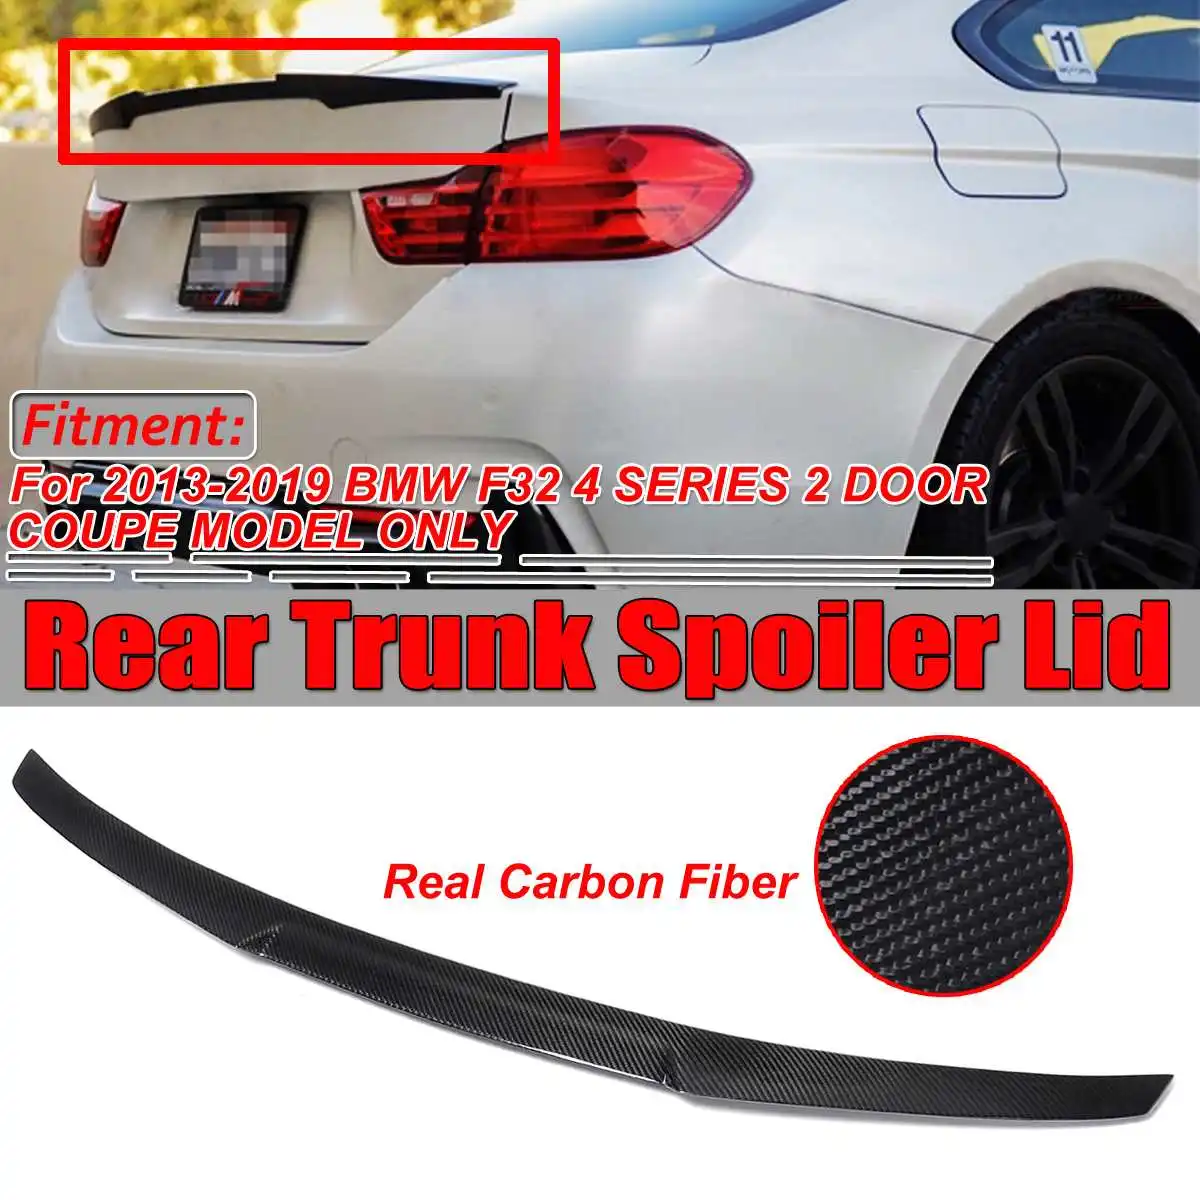 For 15 M4 STYLE CARBON FIBER TRUNK LID SPOILER WING BMW F32 4 Series Coupe 